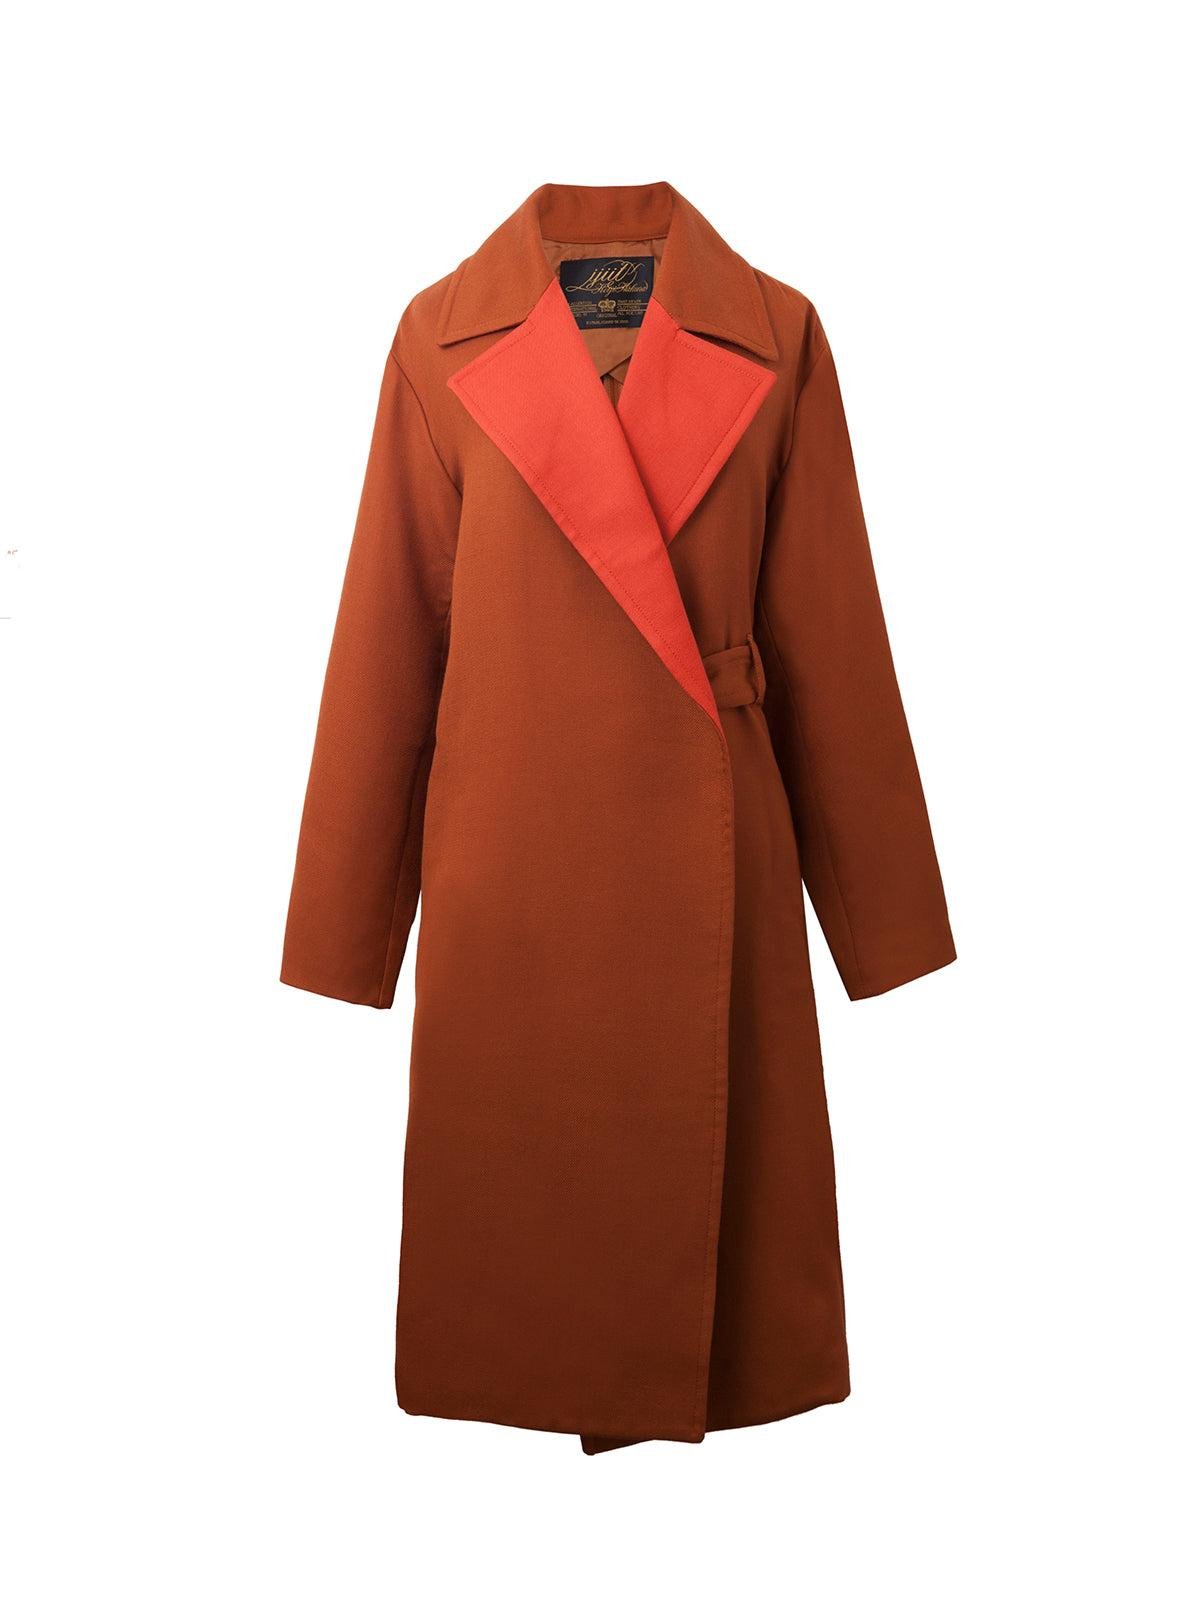 IJIIT Bicolor Tailored Coat by COCKTAIL